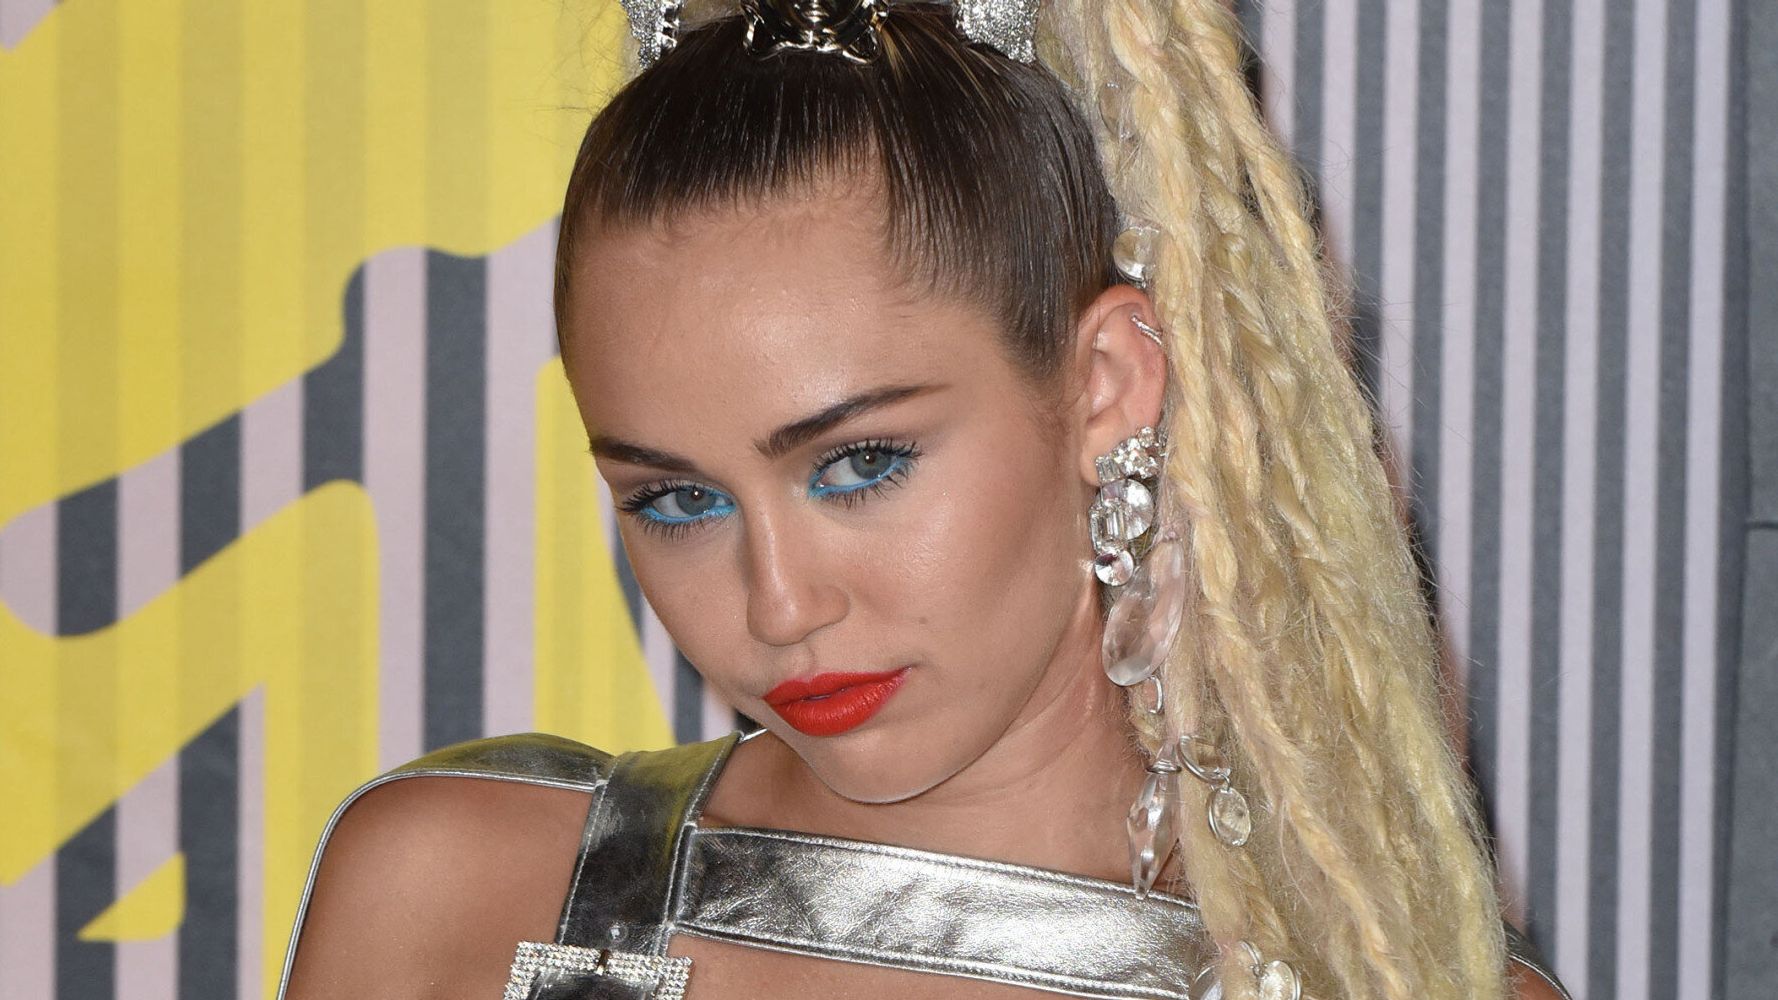 9. Miley Cyrus' Platinum Blue Hair Sparks Debate on Cultural Appropriation - wide 9